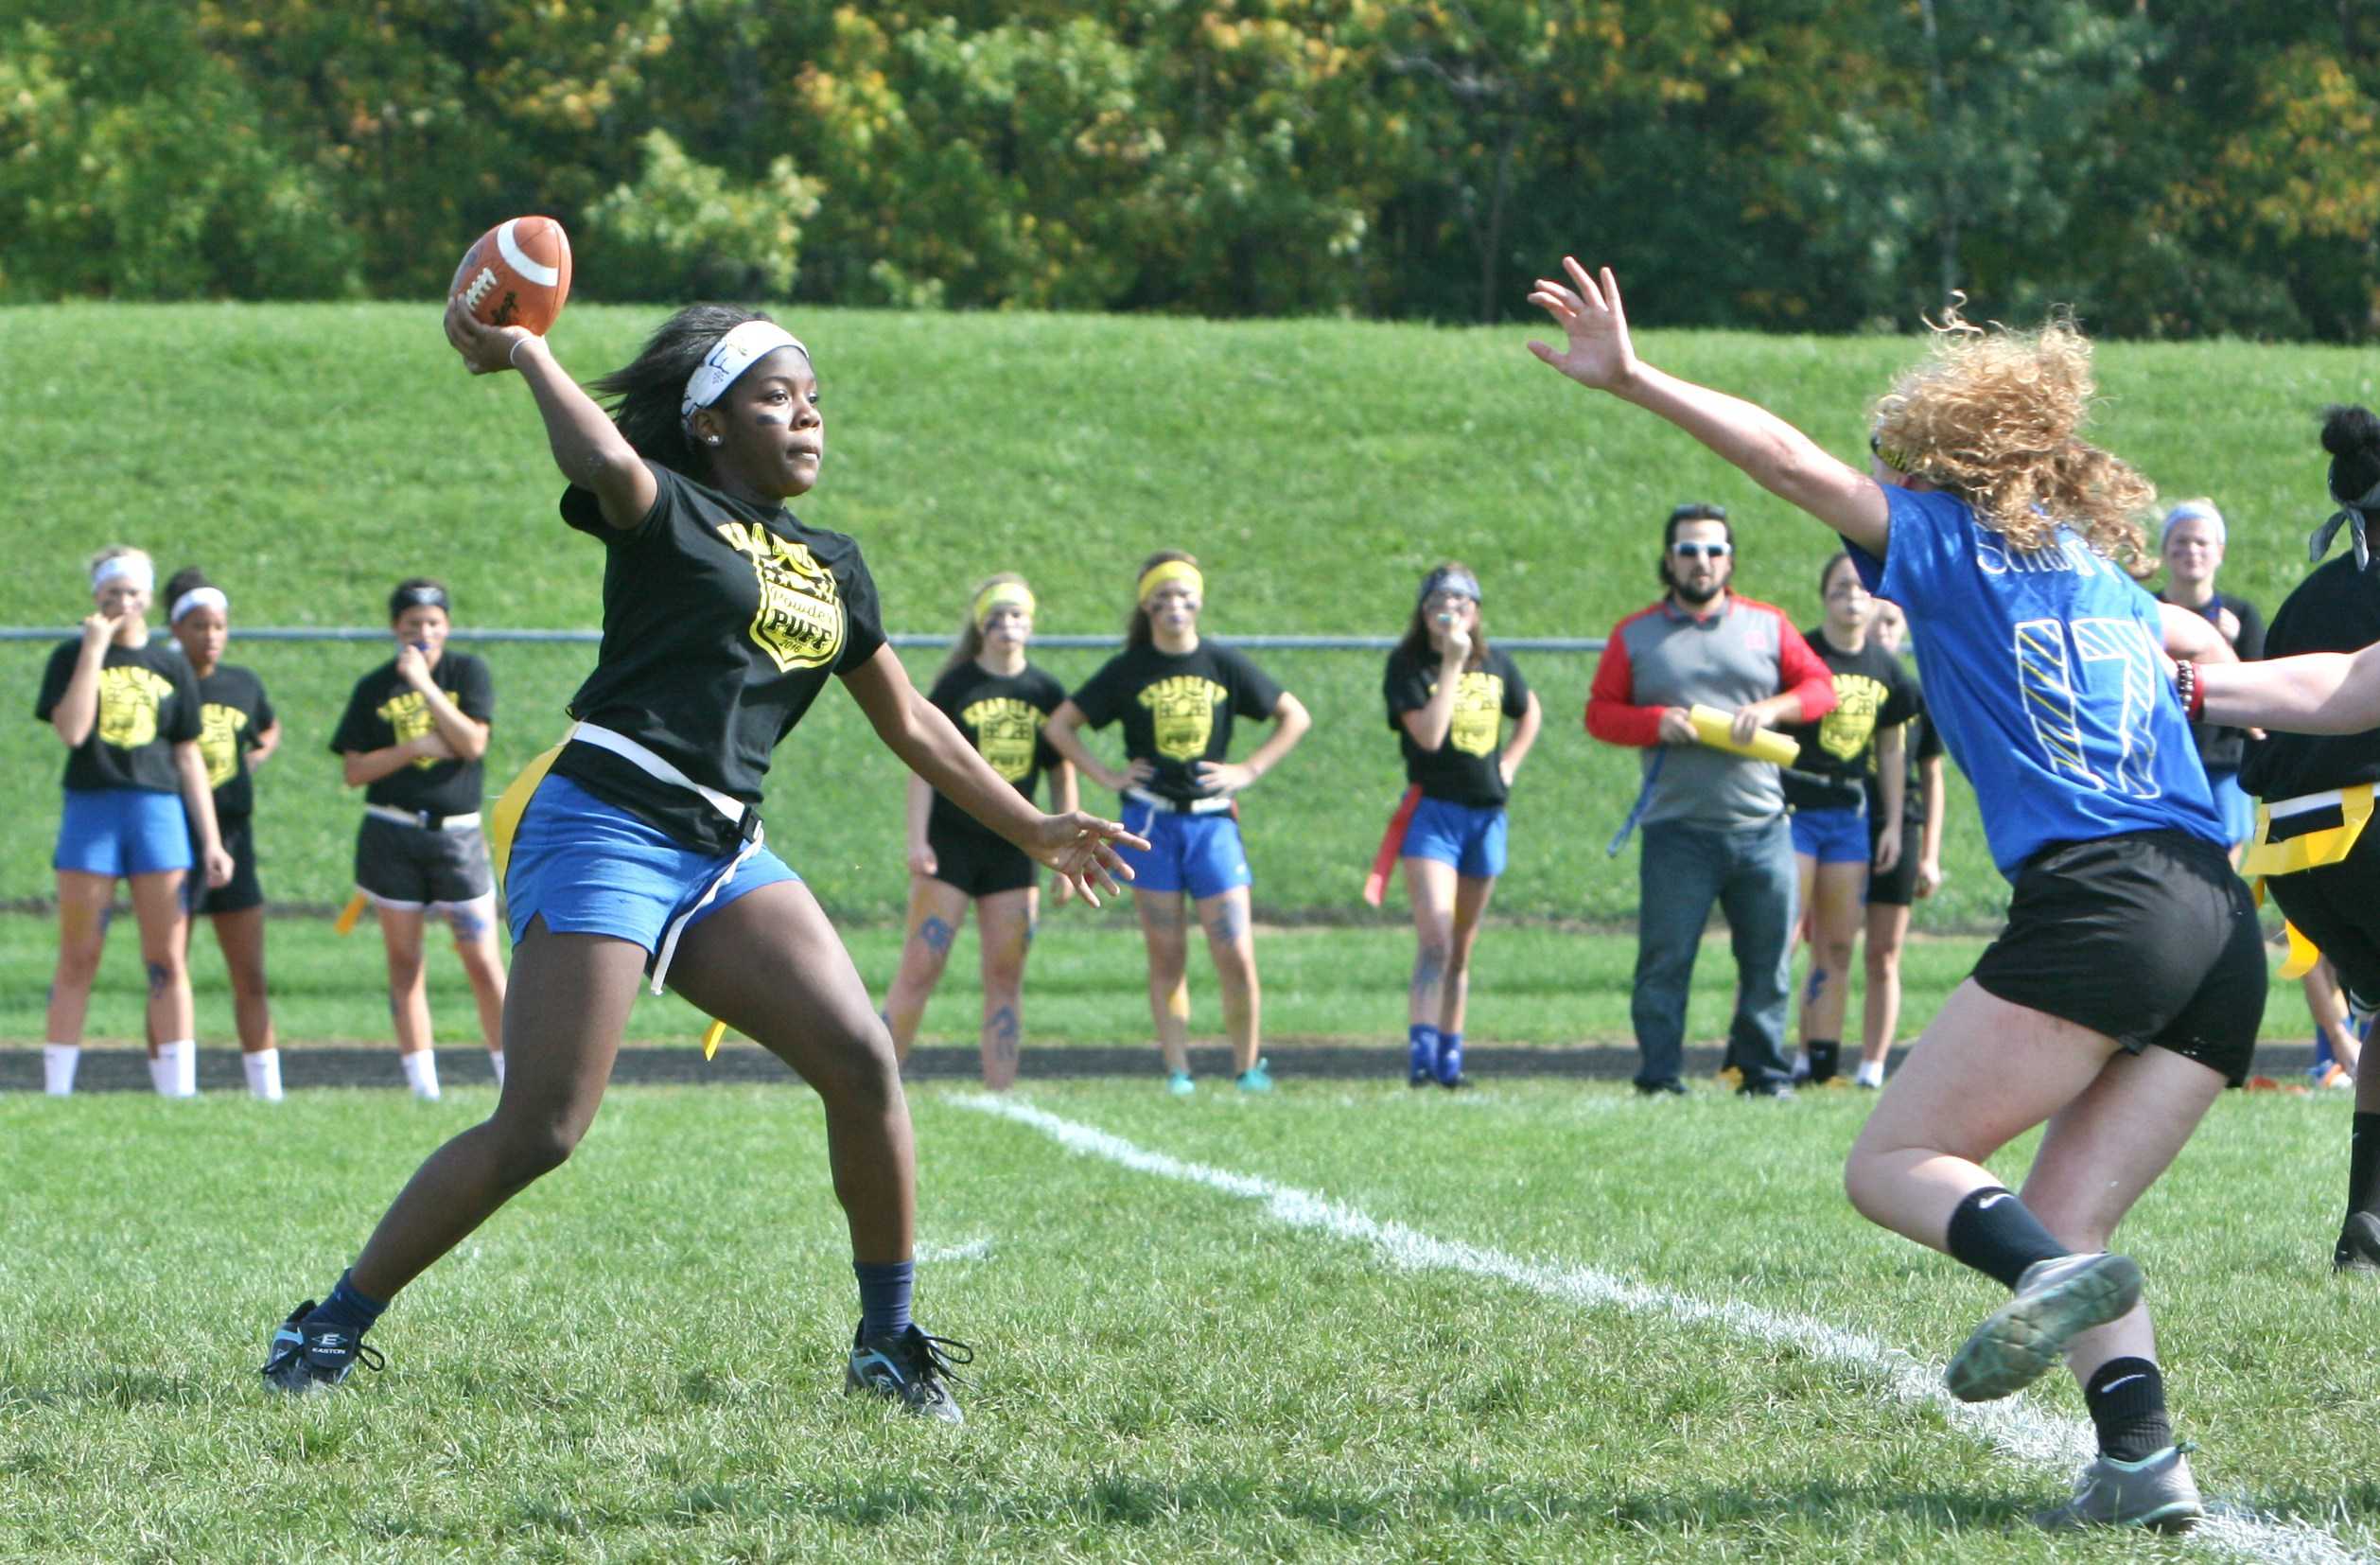 Freshman Jakeira Wash throws a pass in the first drive of the game.